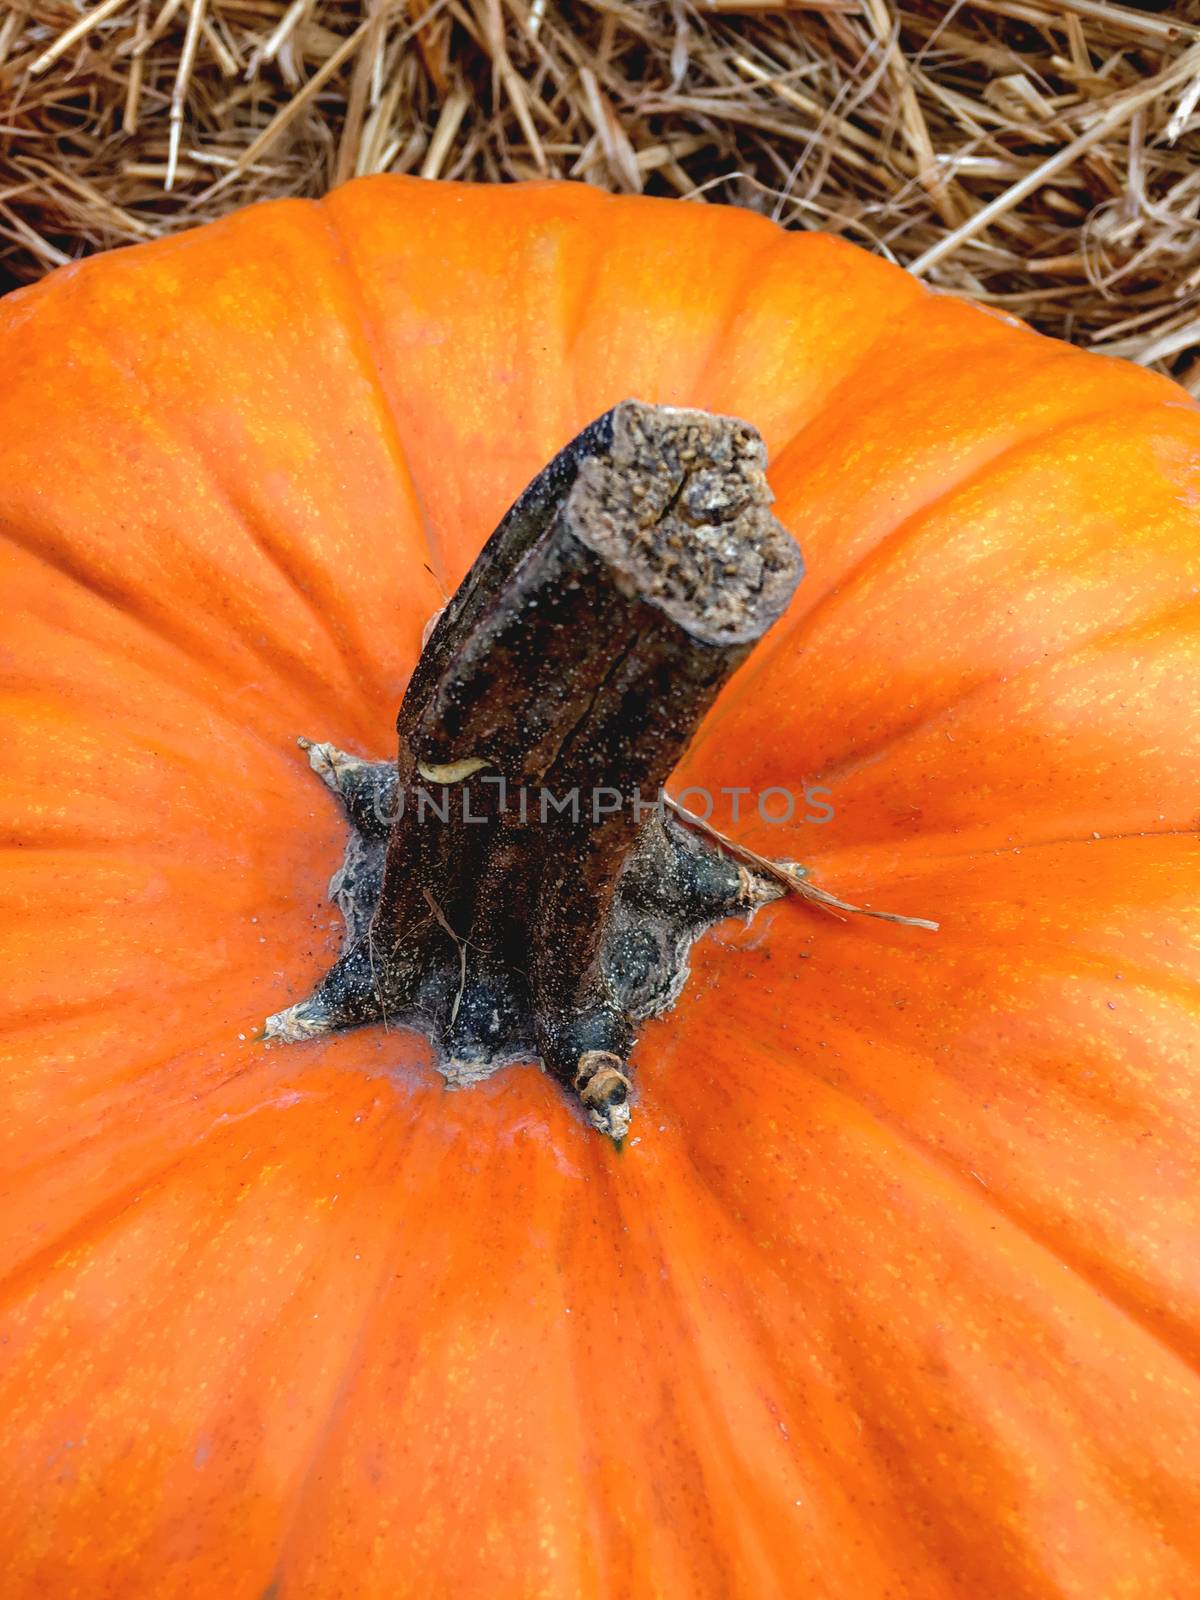 Bright orange pumpkin on straw. Autumn crop. Fall season background with colorful vegetables.